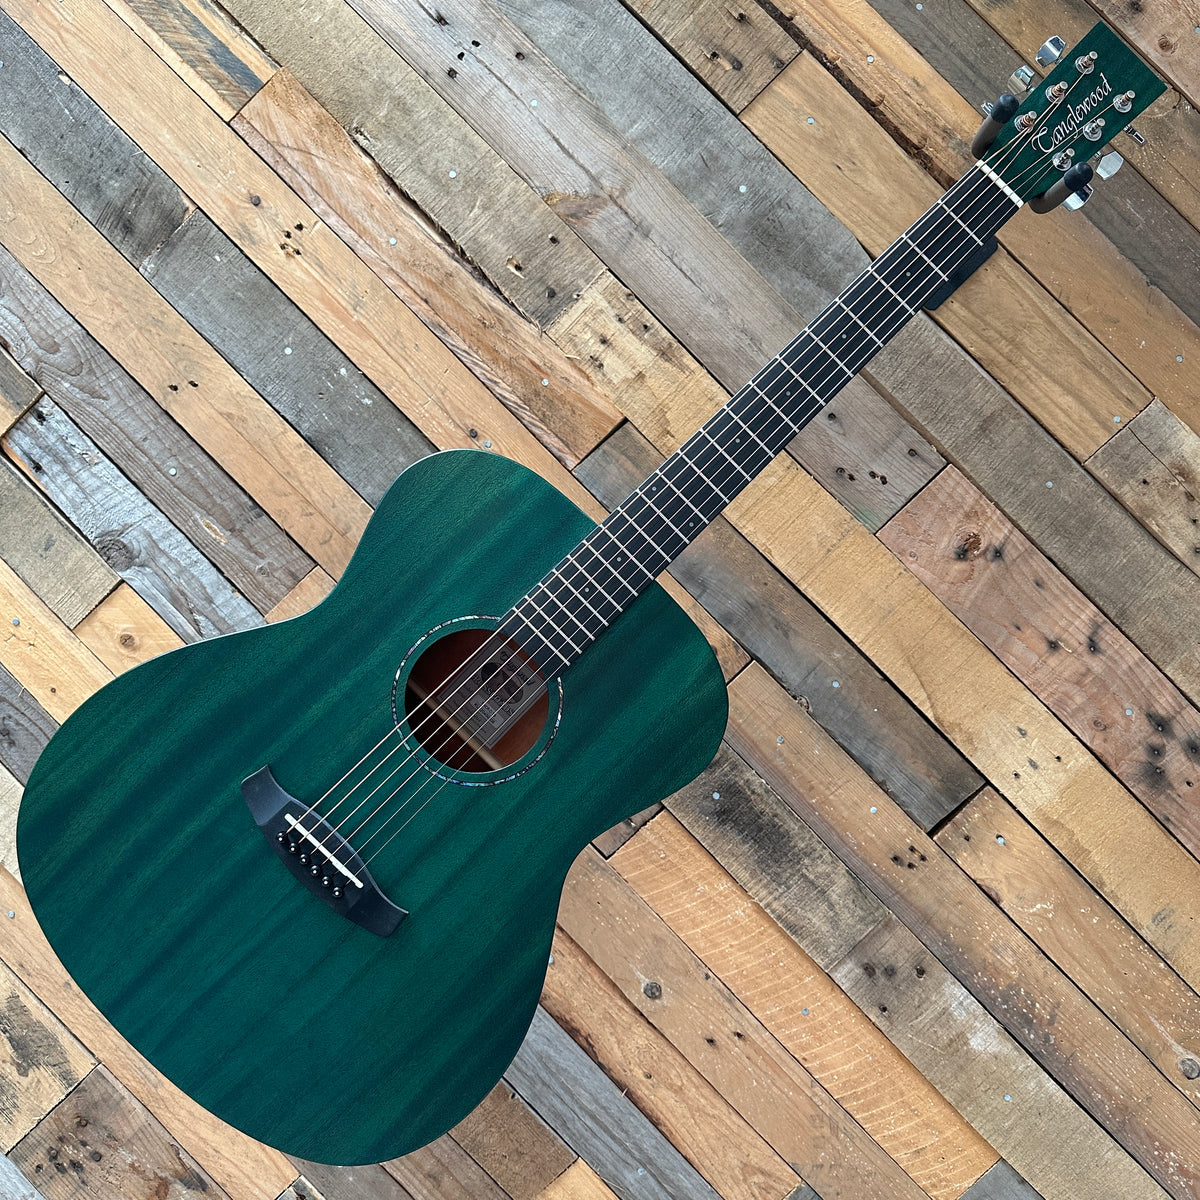 Tanglewood TWCR-O Crossroads Orchestra Acoustic Guitar - Thru Green